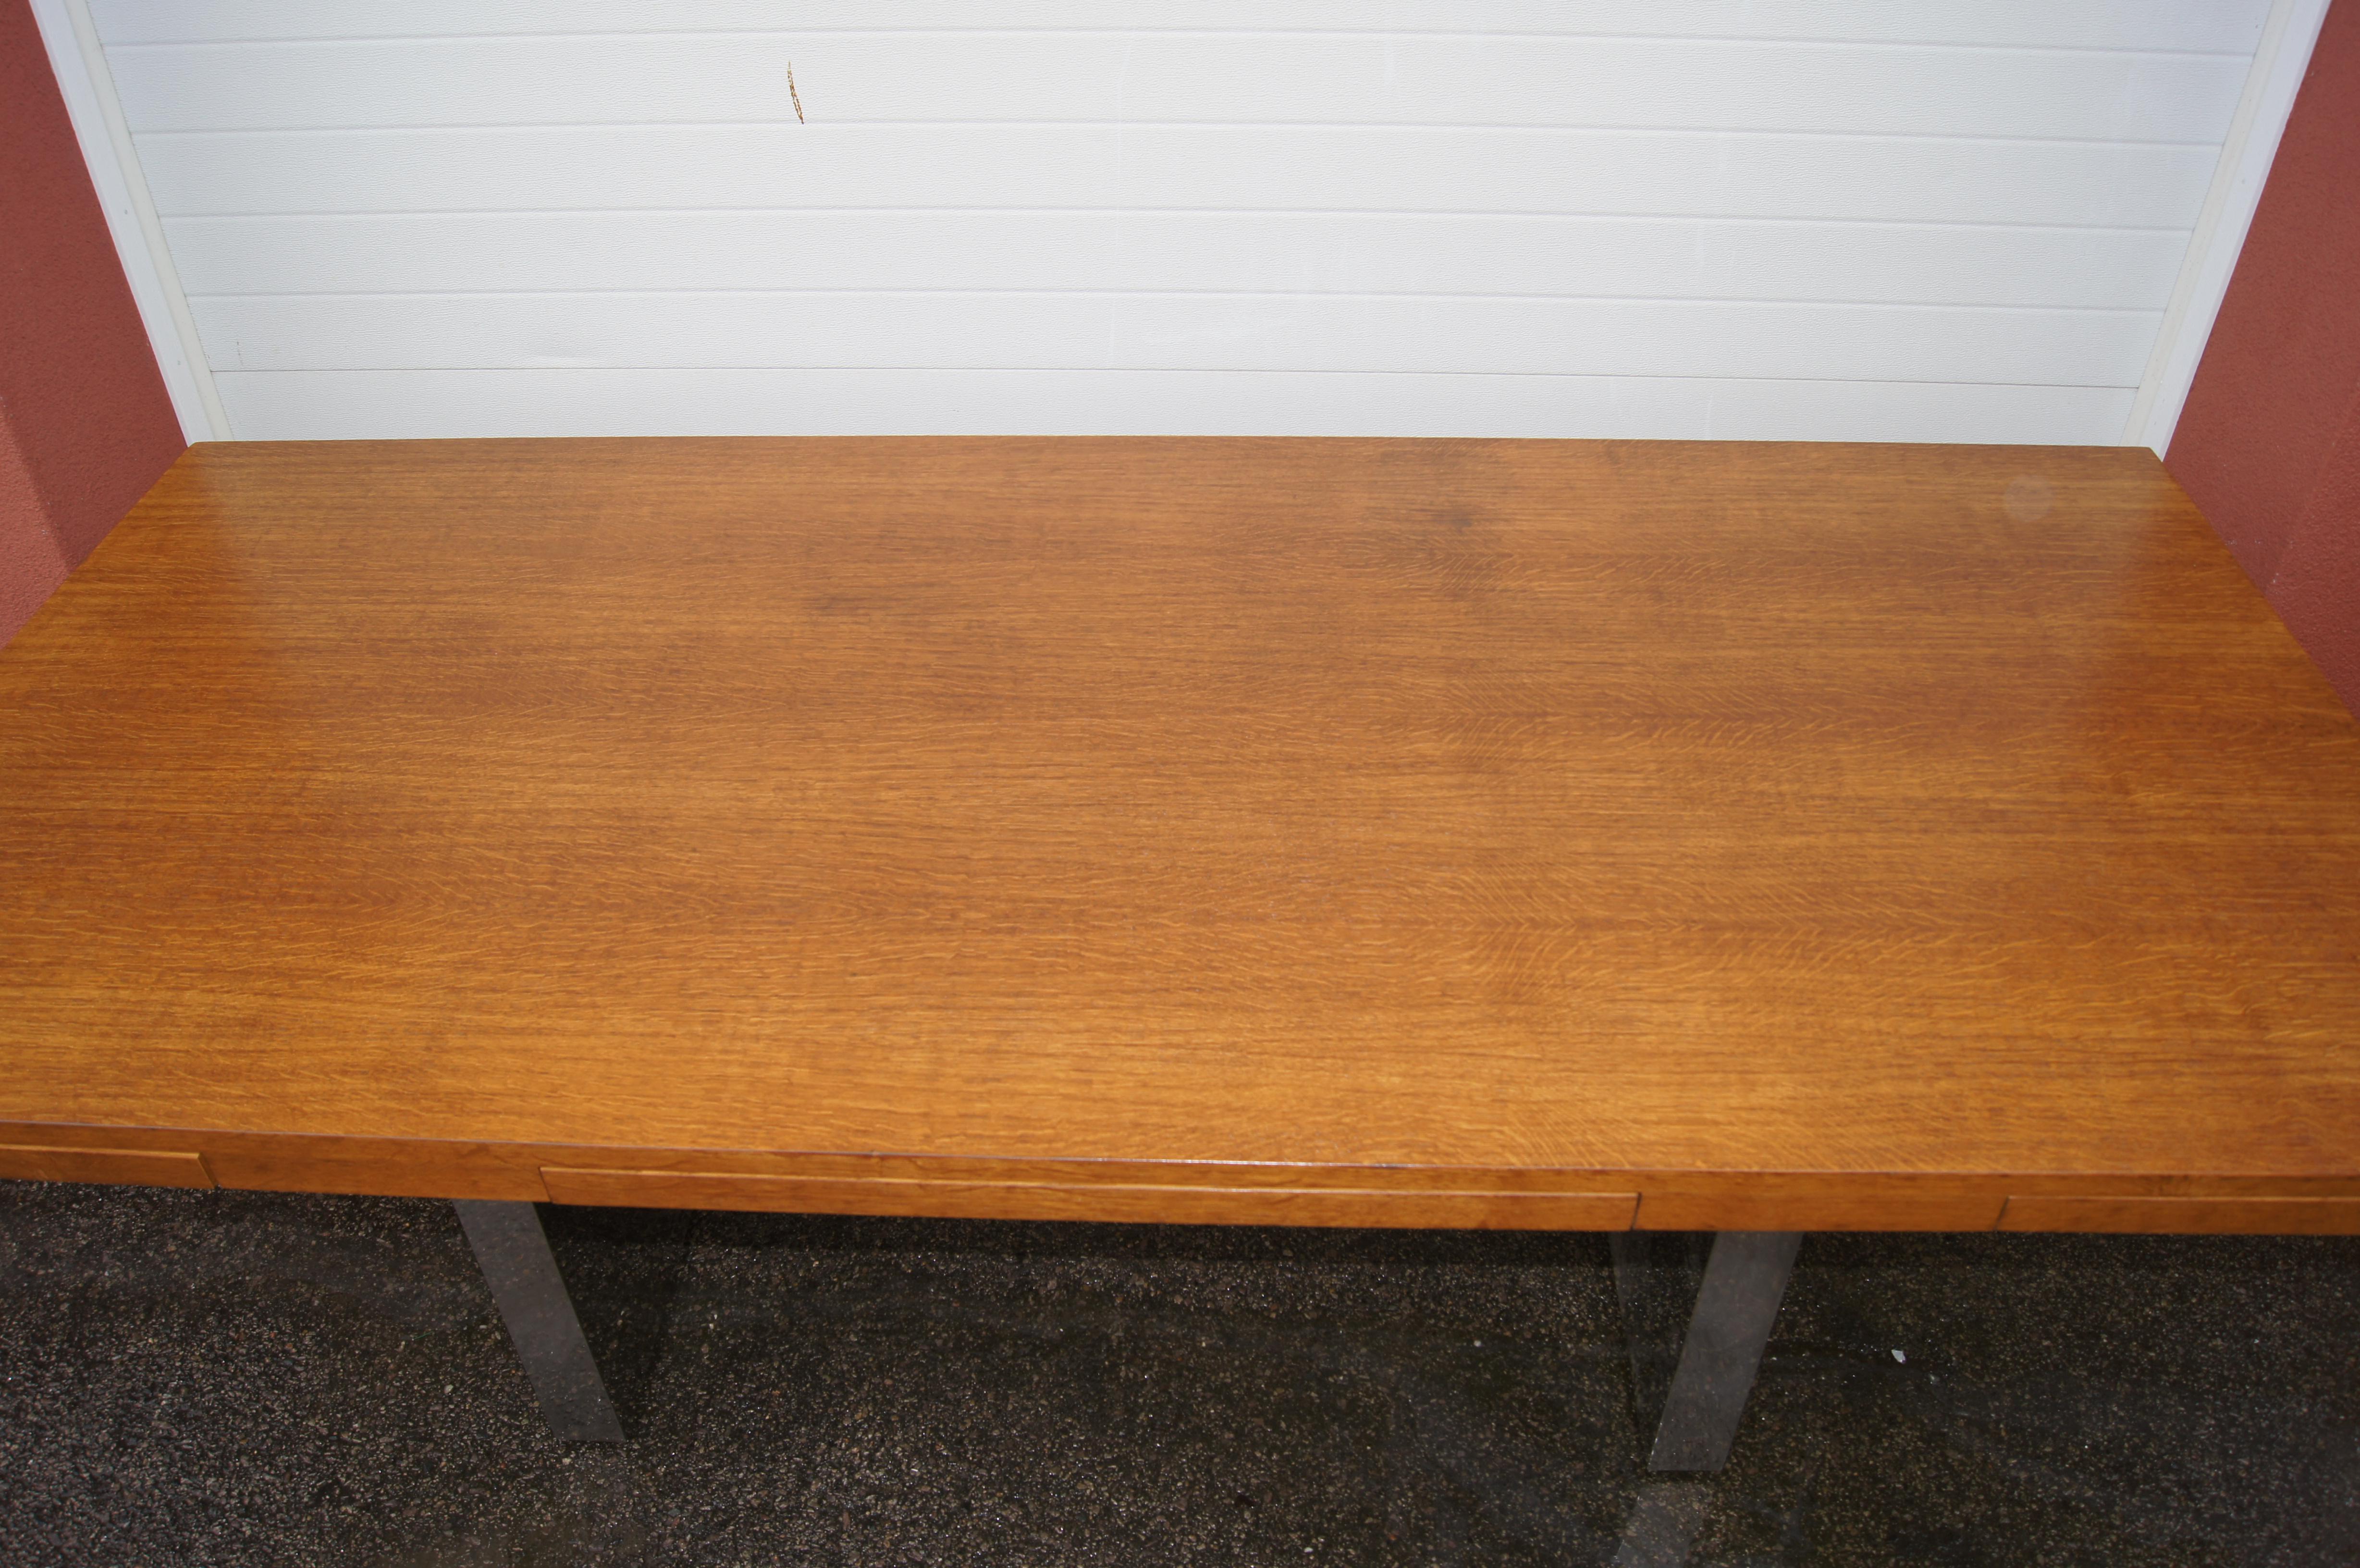 English Oak and Chrome Desk by Roger Sprunger for Dunbar In Good Condition For Sale In Dorchester, MA